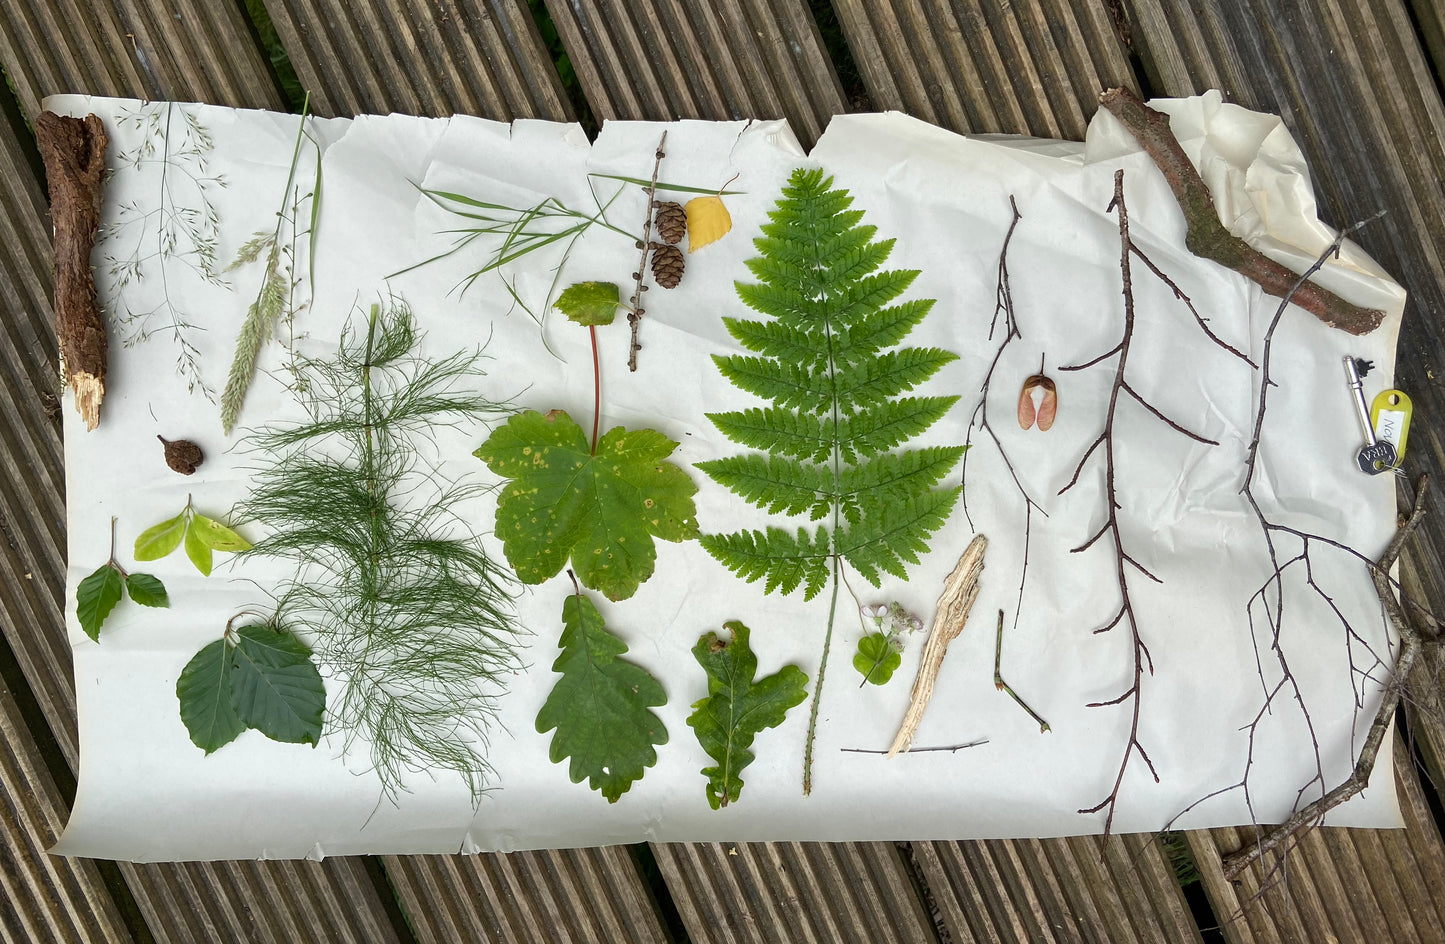 Drawing in Nature – A Children’s Workshop